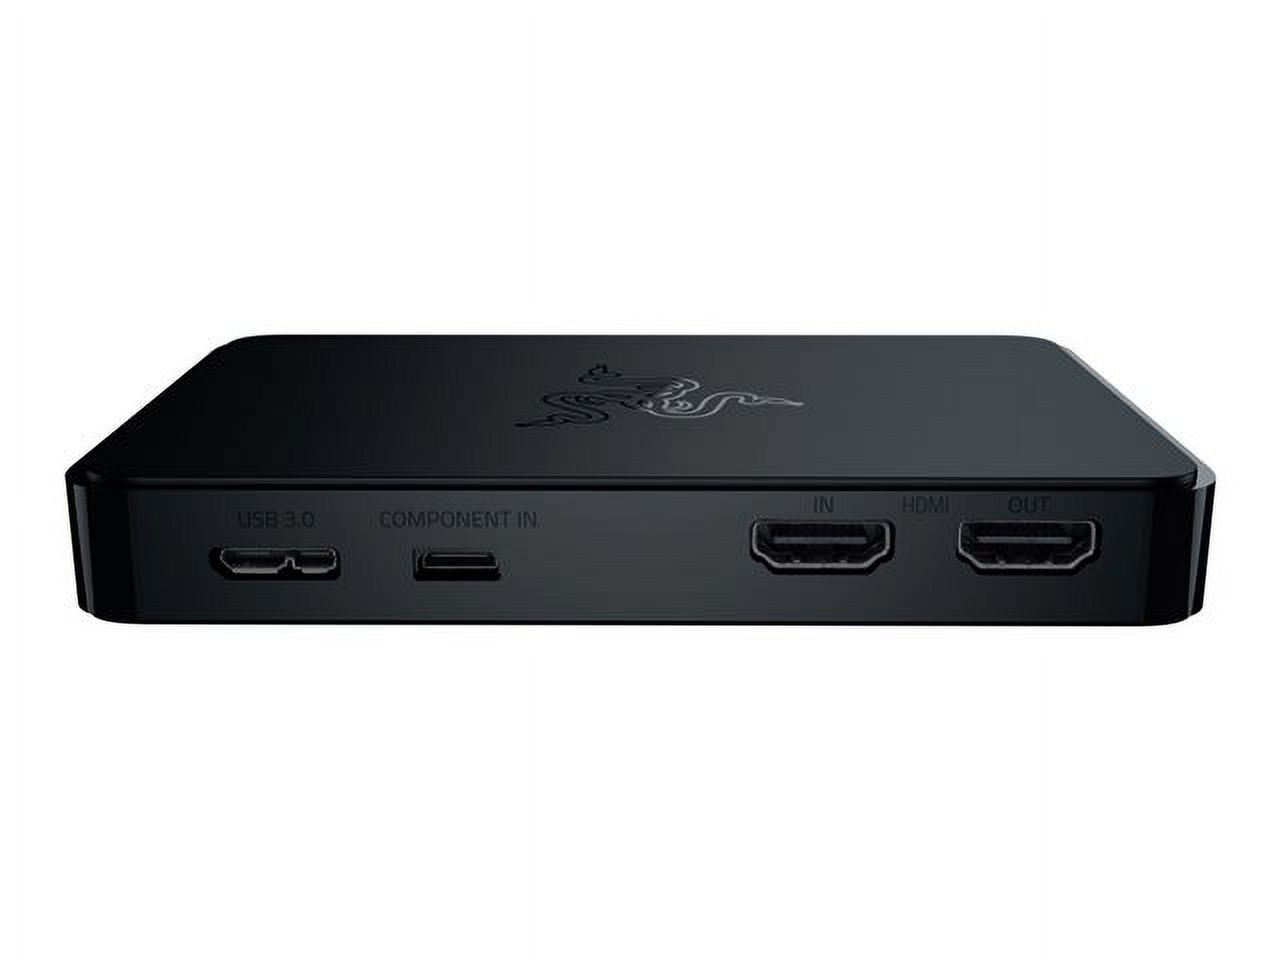 Razer Ripsaw USB 3.0 Game Stream and Capture Card for PC, PlayStation 4 or 3, Xbox One or 360, or Wii U, Uncompressed HD 1080p 60fps - image 2 of 50